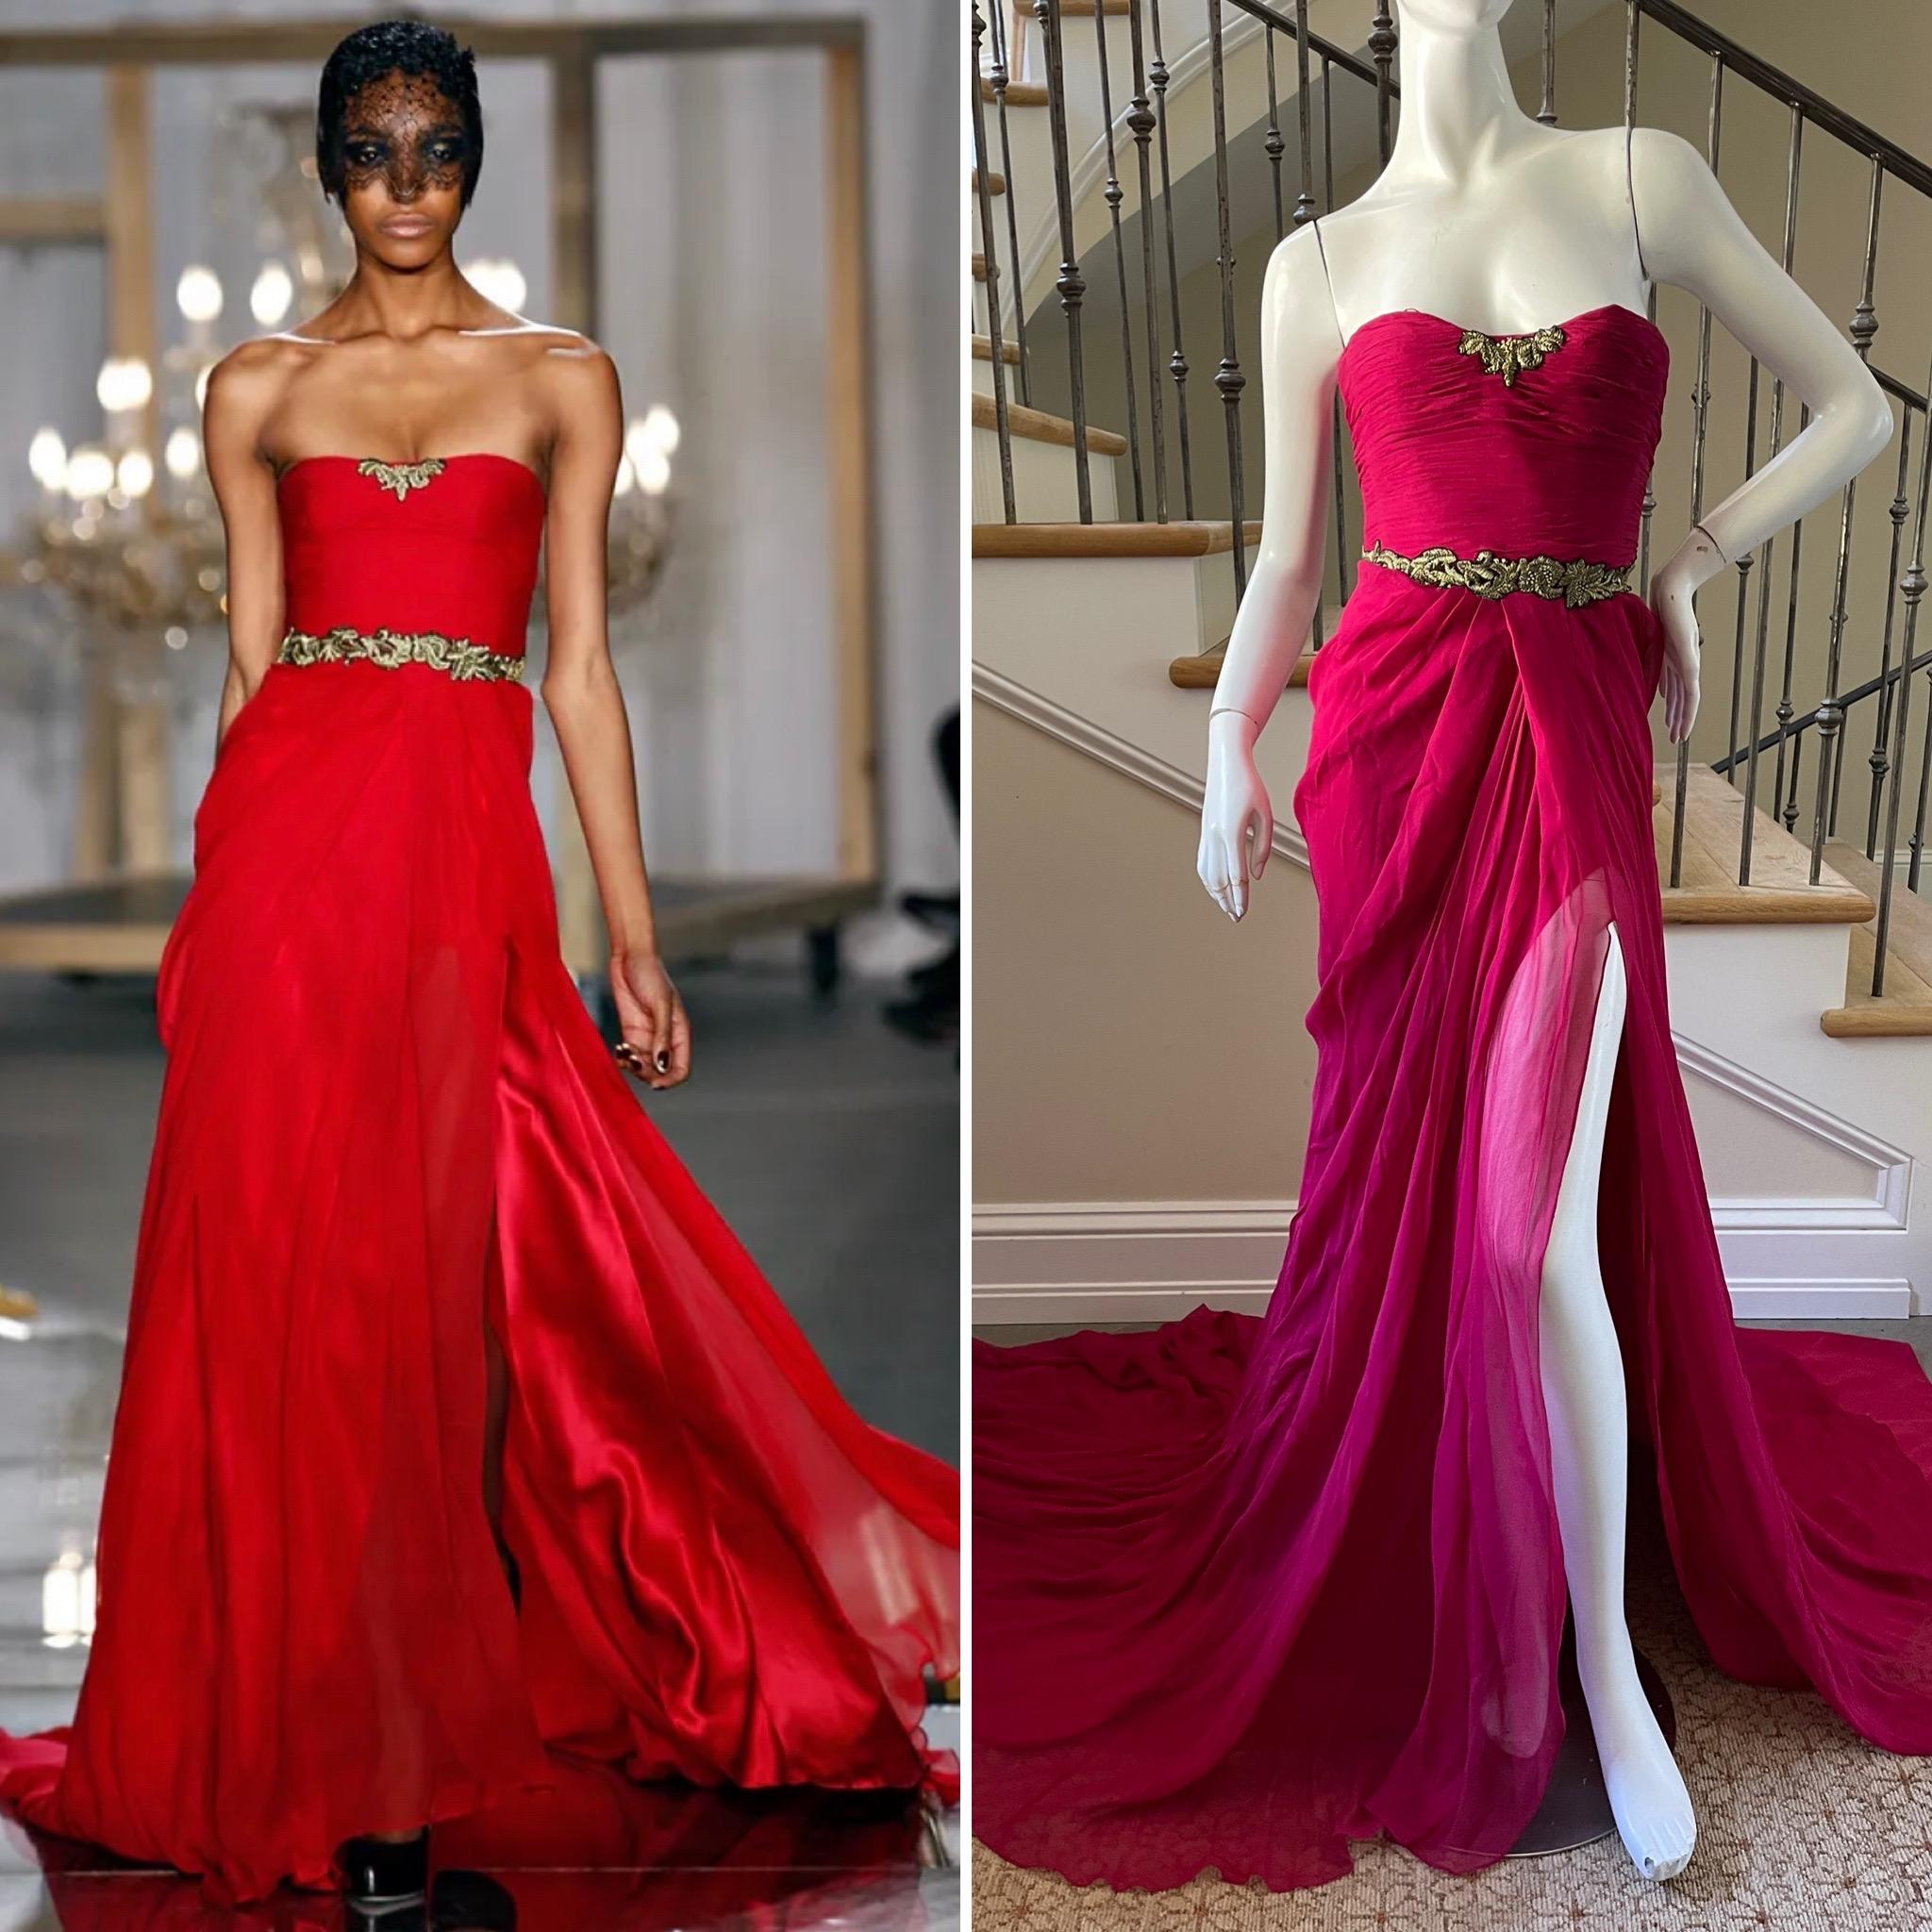 Jason Wu Spring 2011 Dramatic Strapless Red Evening Dress with Train
This is so elegant, they don't make them like this anymore.
Lined in silk, please use the zoom feature to see all the details.
Size XS
 Bust 30